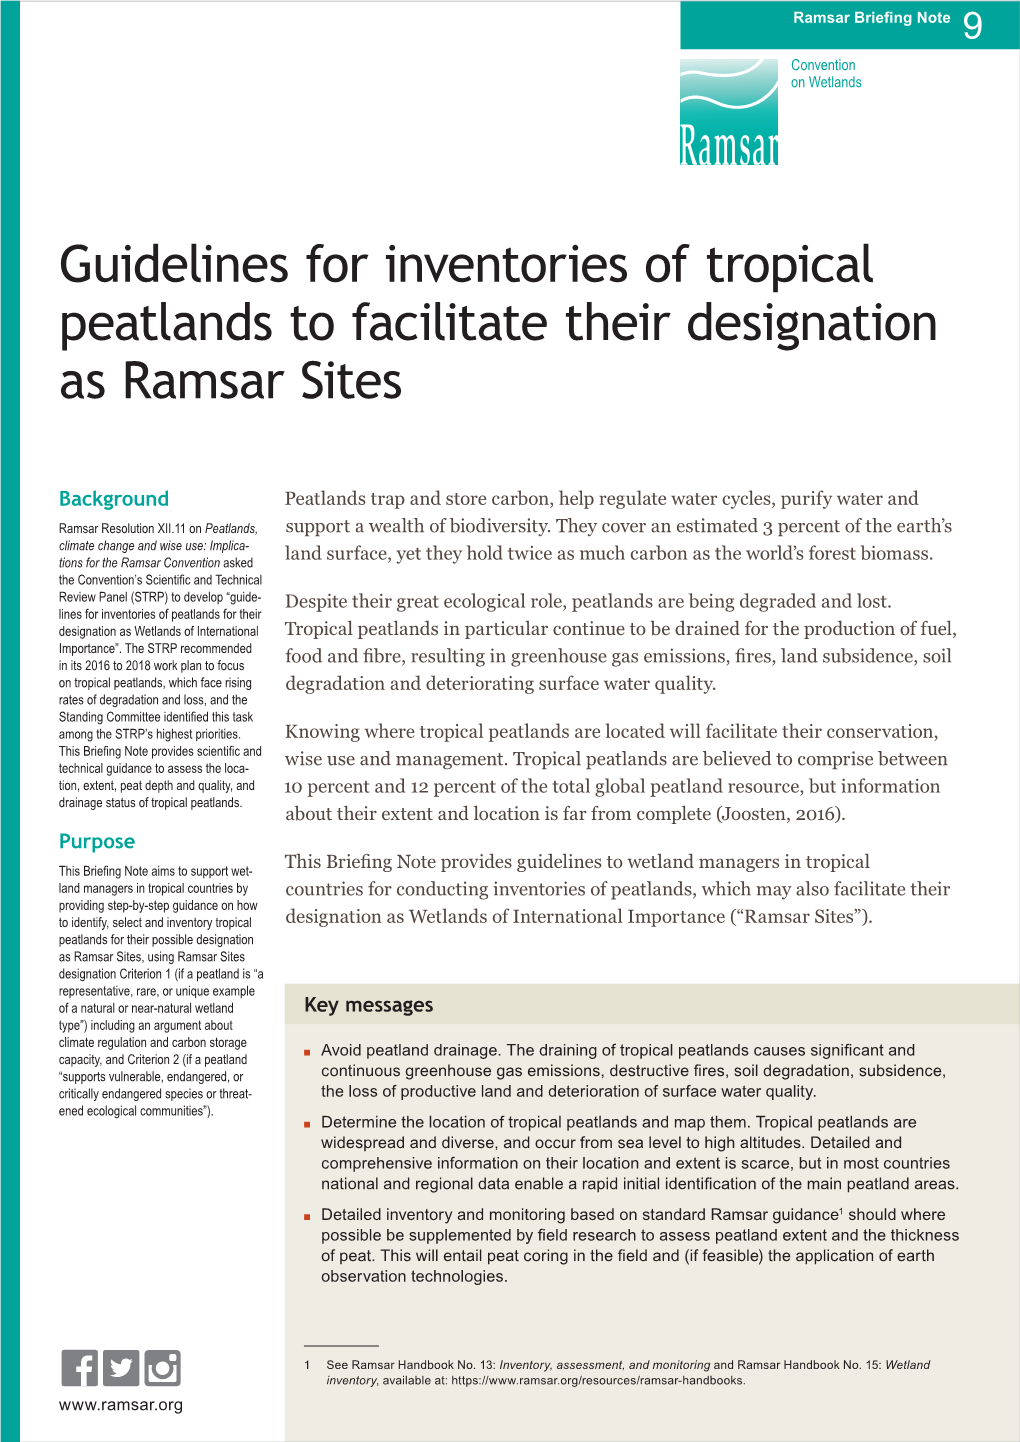 Guidelines for Inventories of Tropical Peatlands to Facilitate Their Designation As Ramsar Sites